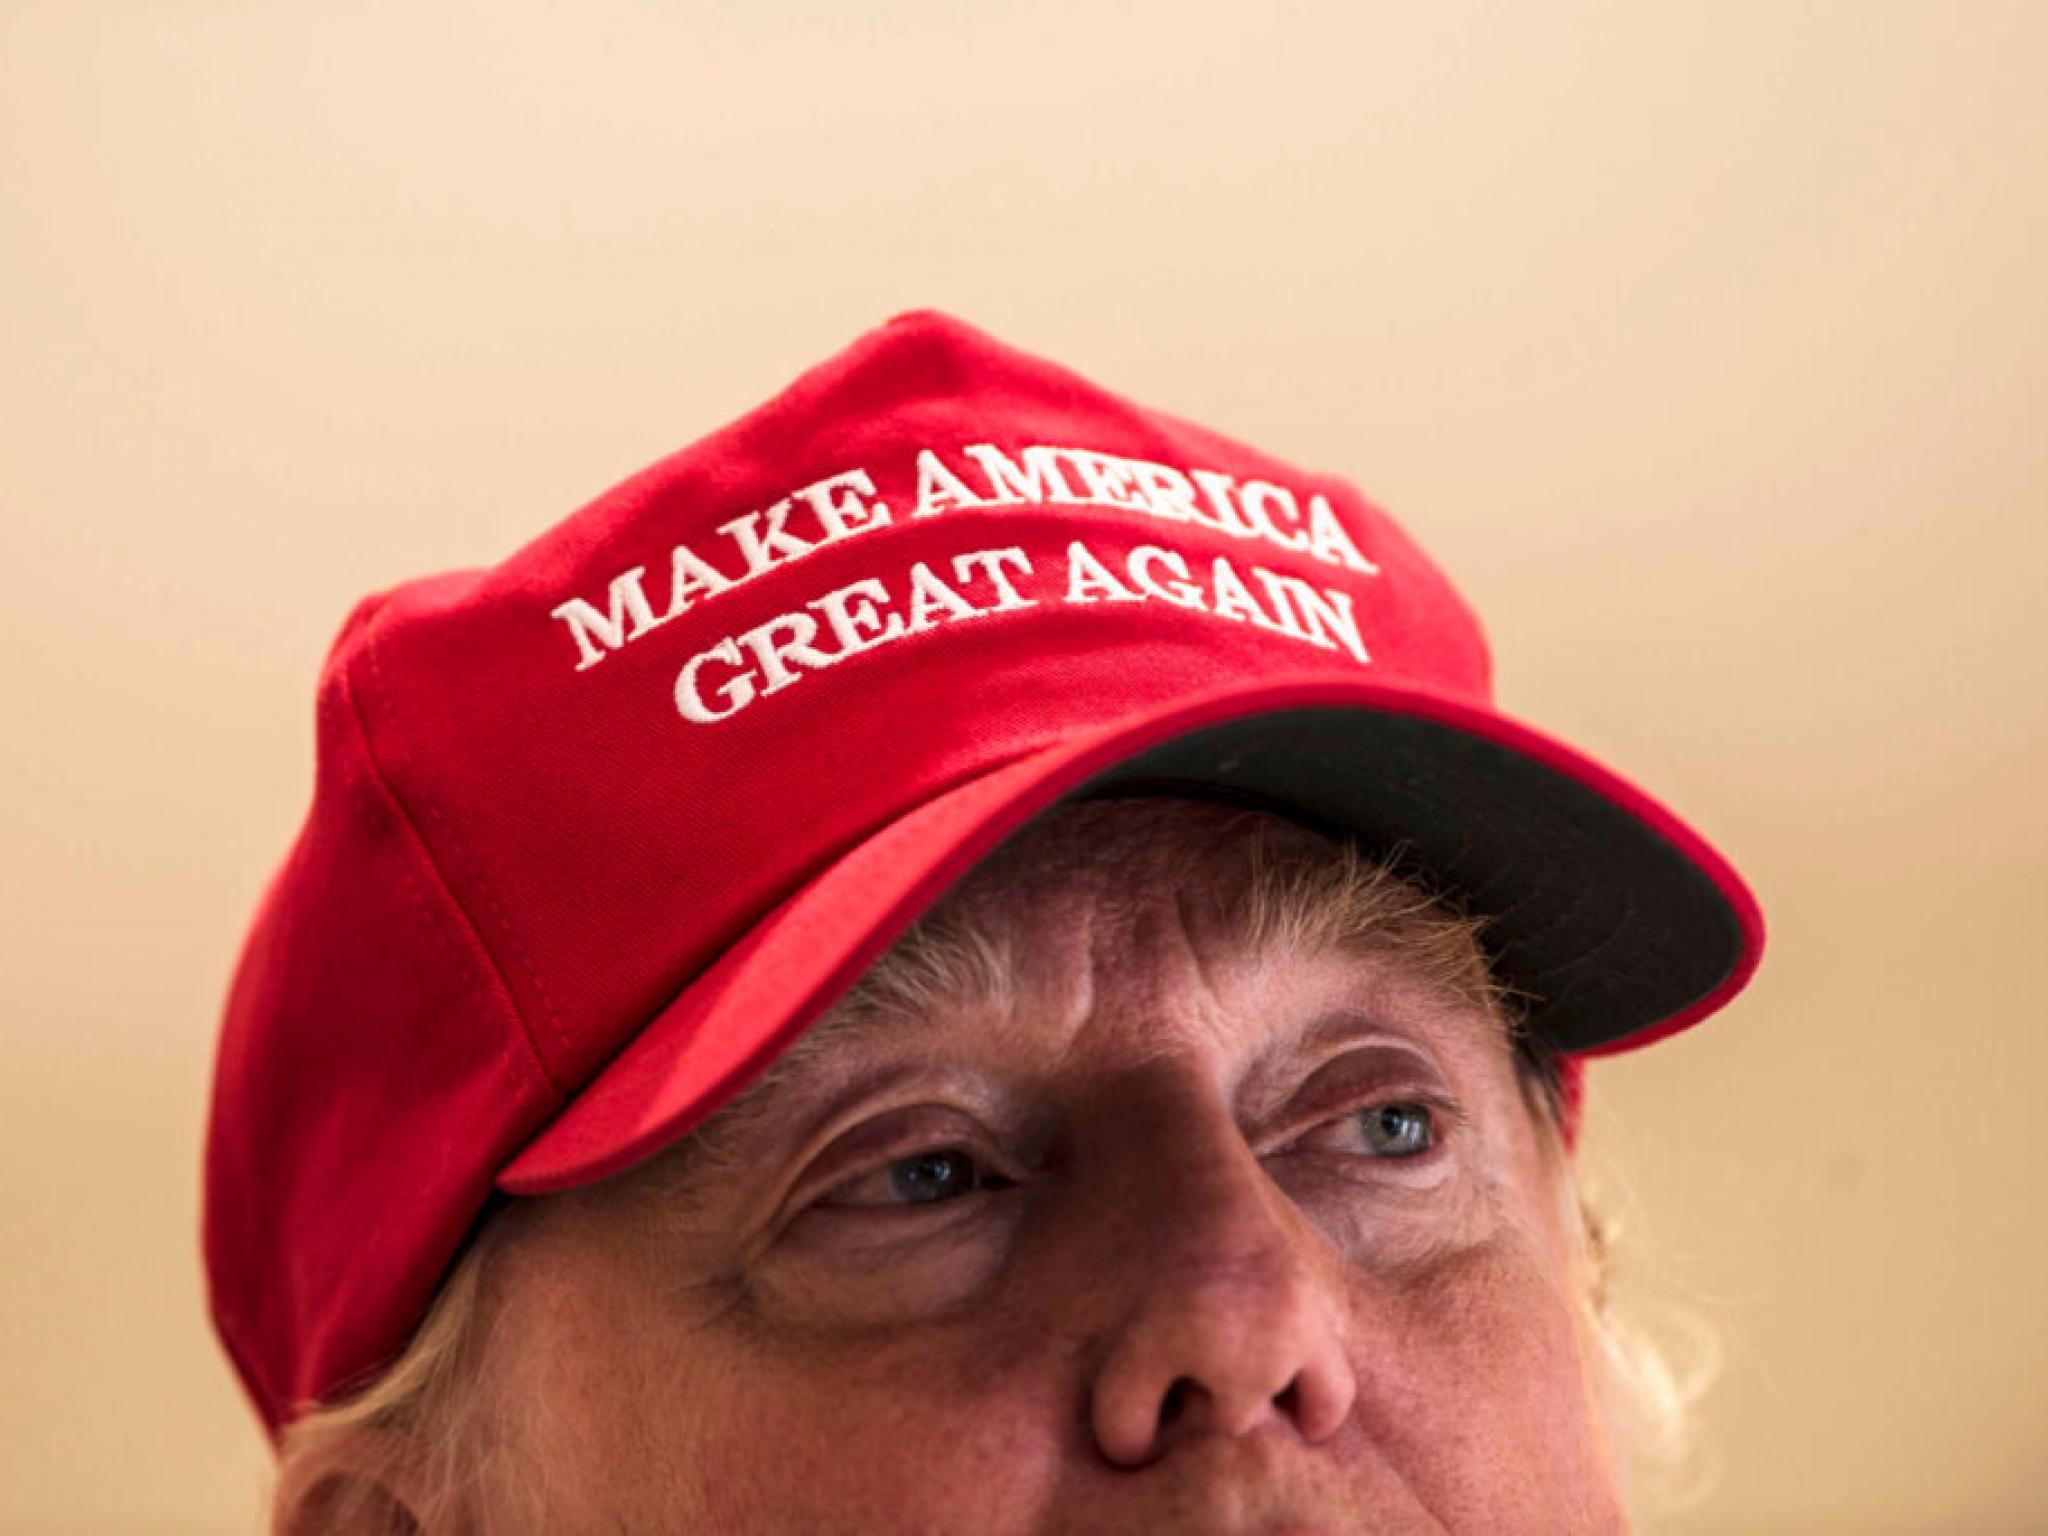  donald-trumps-maga-cap-sparks-60m-meme-coin-nets-millionaire-trader-7x-return-in-4-days 